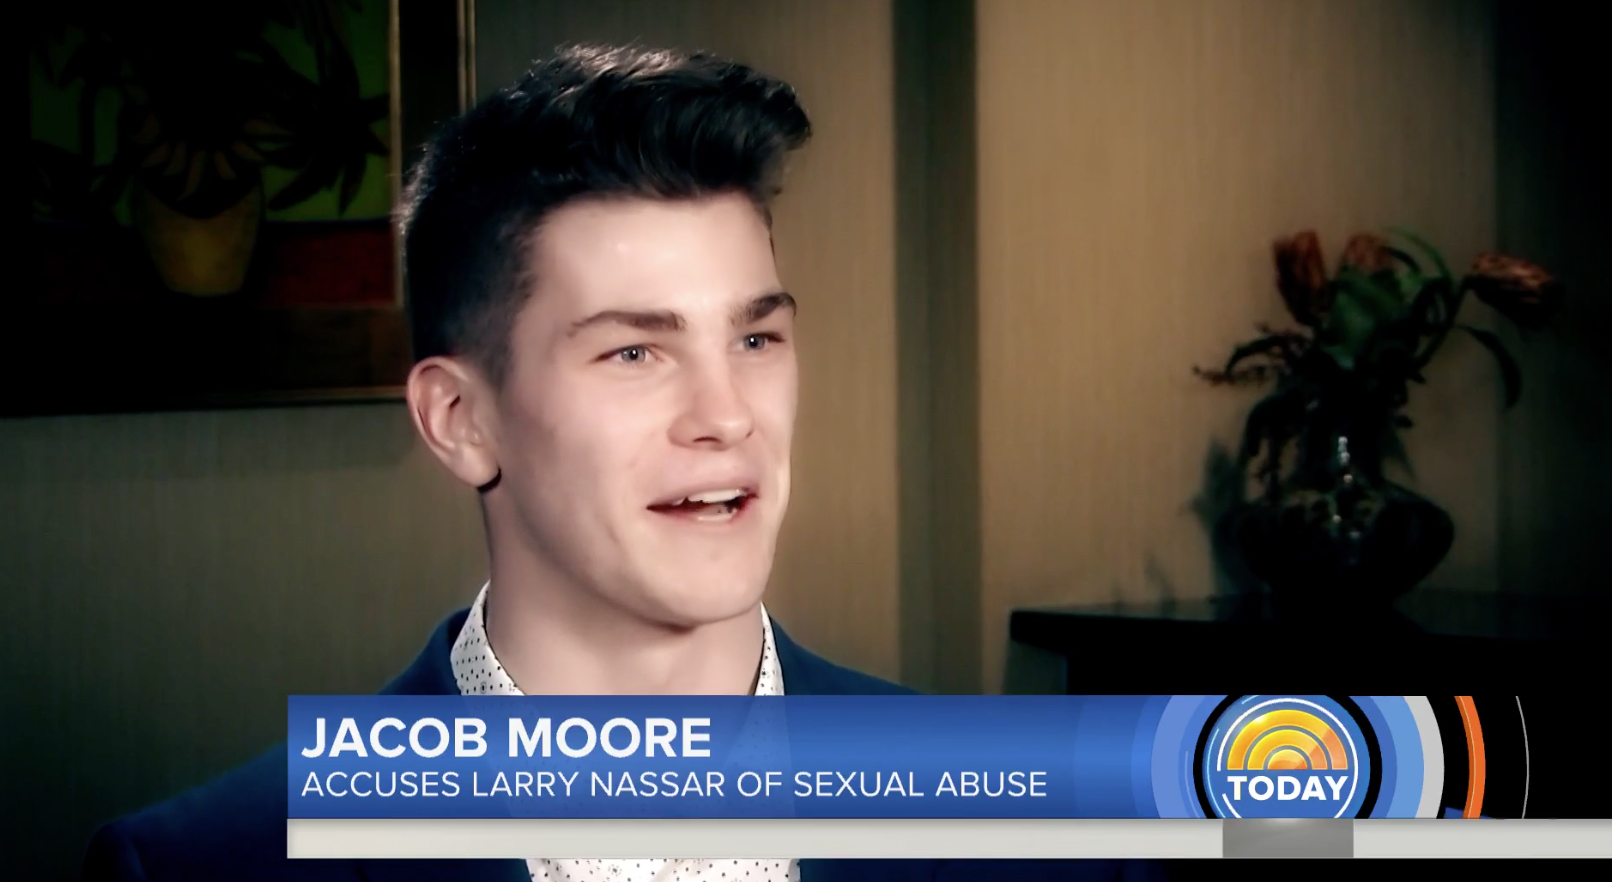 Jacob Moore, the first male gymnast to accuse former USA Gymnastics doctor Larry Nassar of sexual abuse, spoke out to NBC's Today show (Today Show)